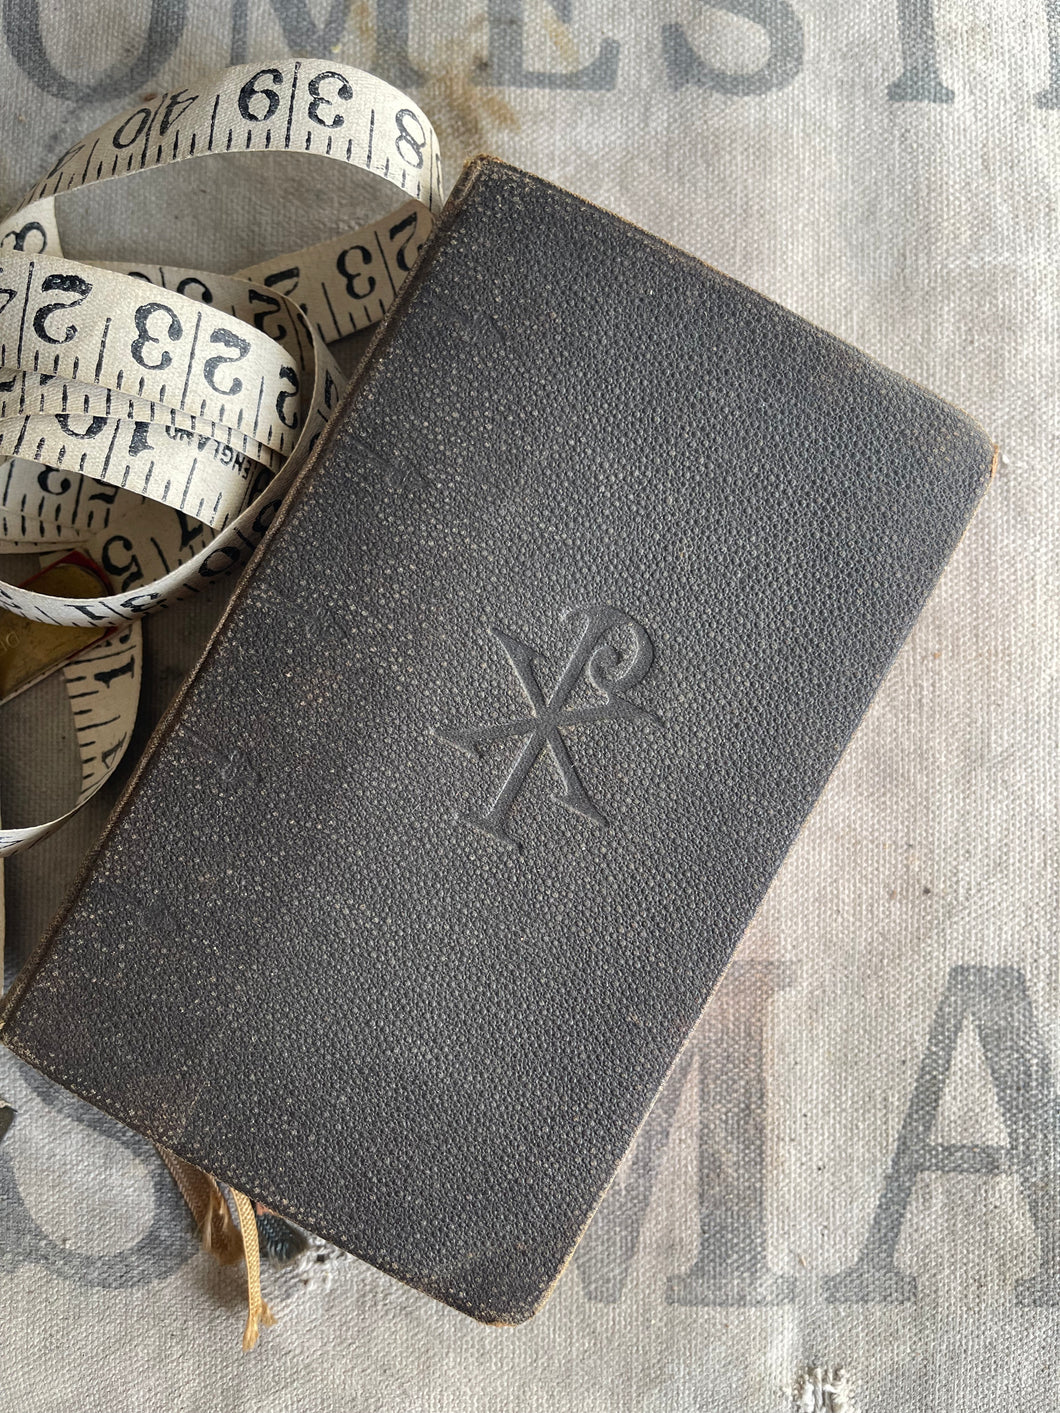 Vintage Leather Bound Saint Andrew Daily Missal Embossed Prayer Book - Circa 1940.